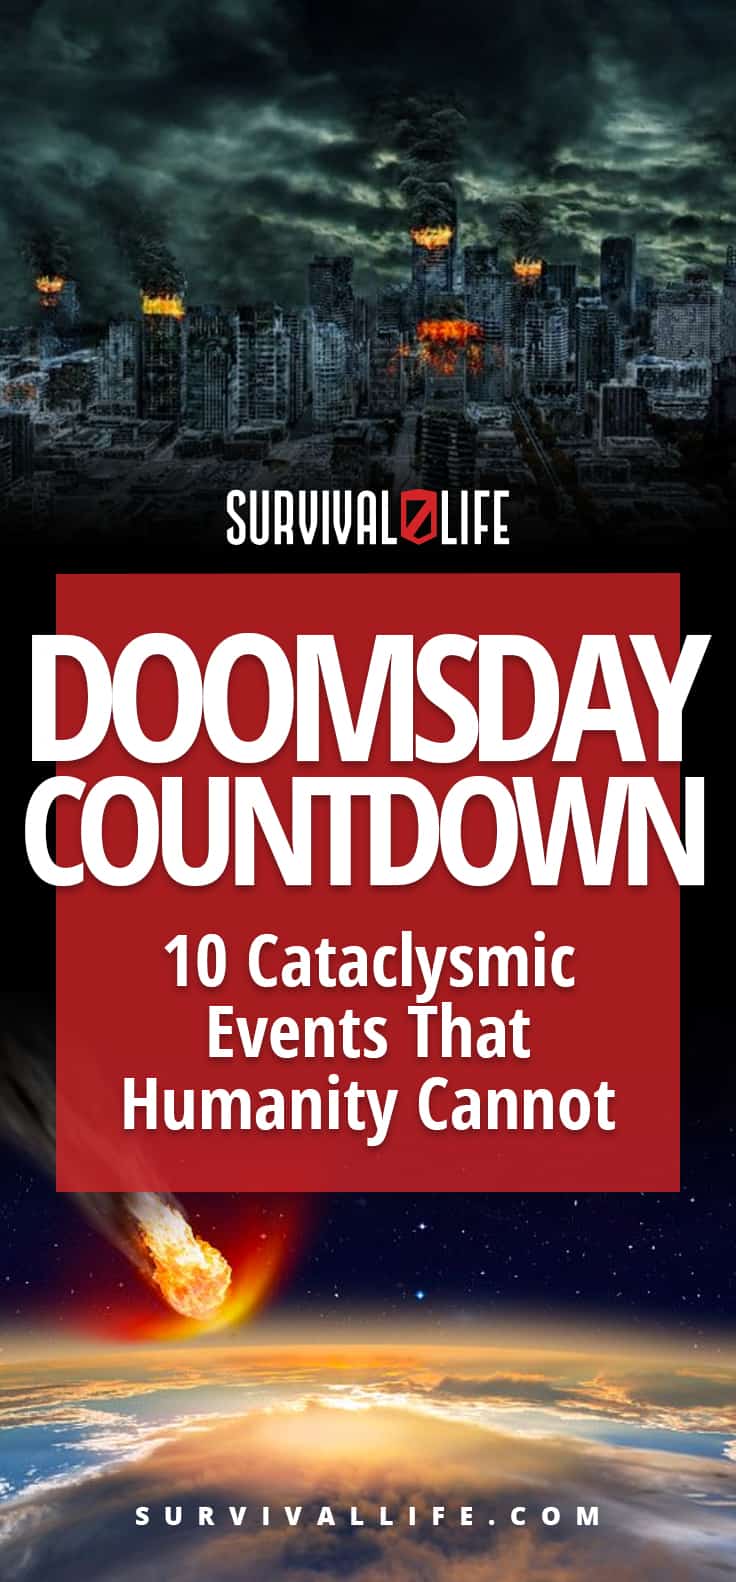 Doomsday Countdown: 10 Cataclysmic Events That Humanity Cannot Survive